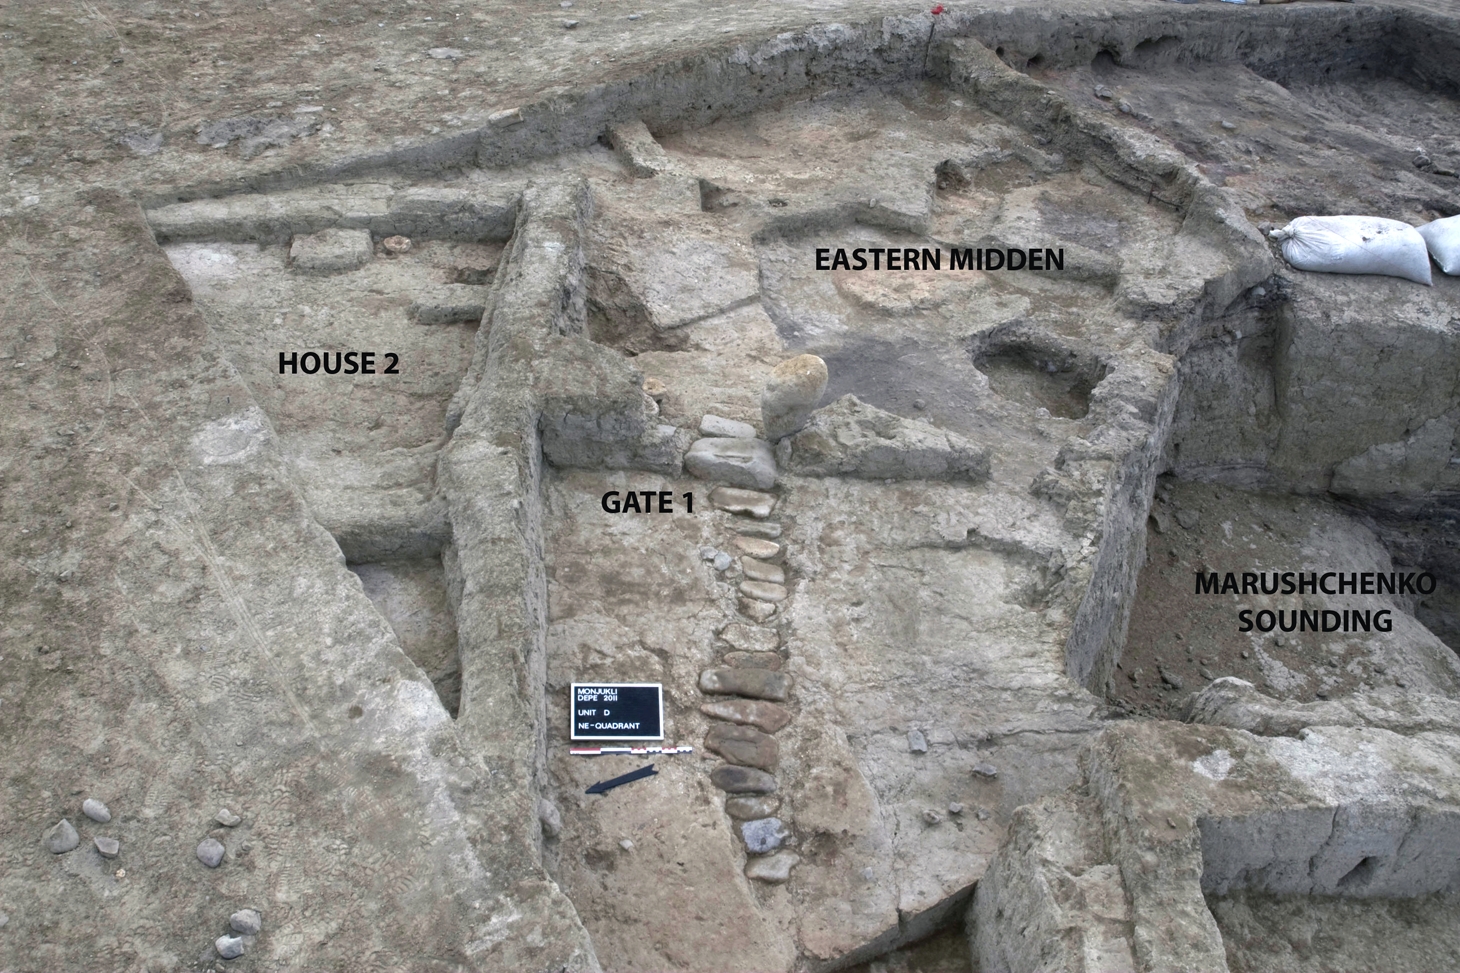 The location of the Eastern Midden in relation to Gate 1 and the partially paved street leading up to the gate. House 2 borders the street on its north side. The deep sounding excavated by A. Marushchenko is visible on the righthand portion of the picture.